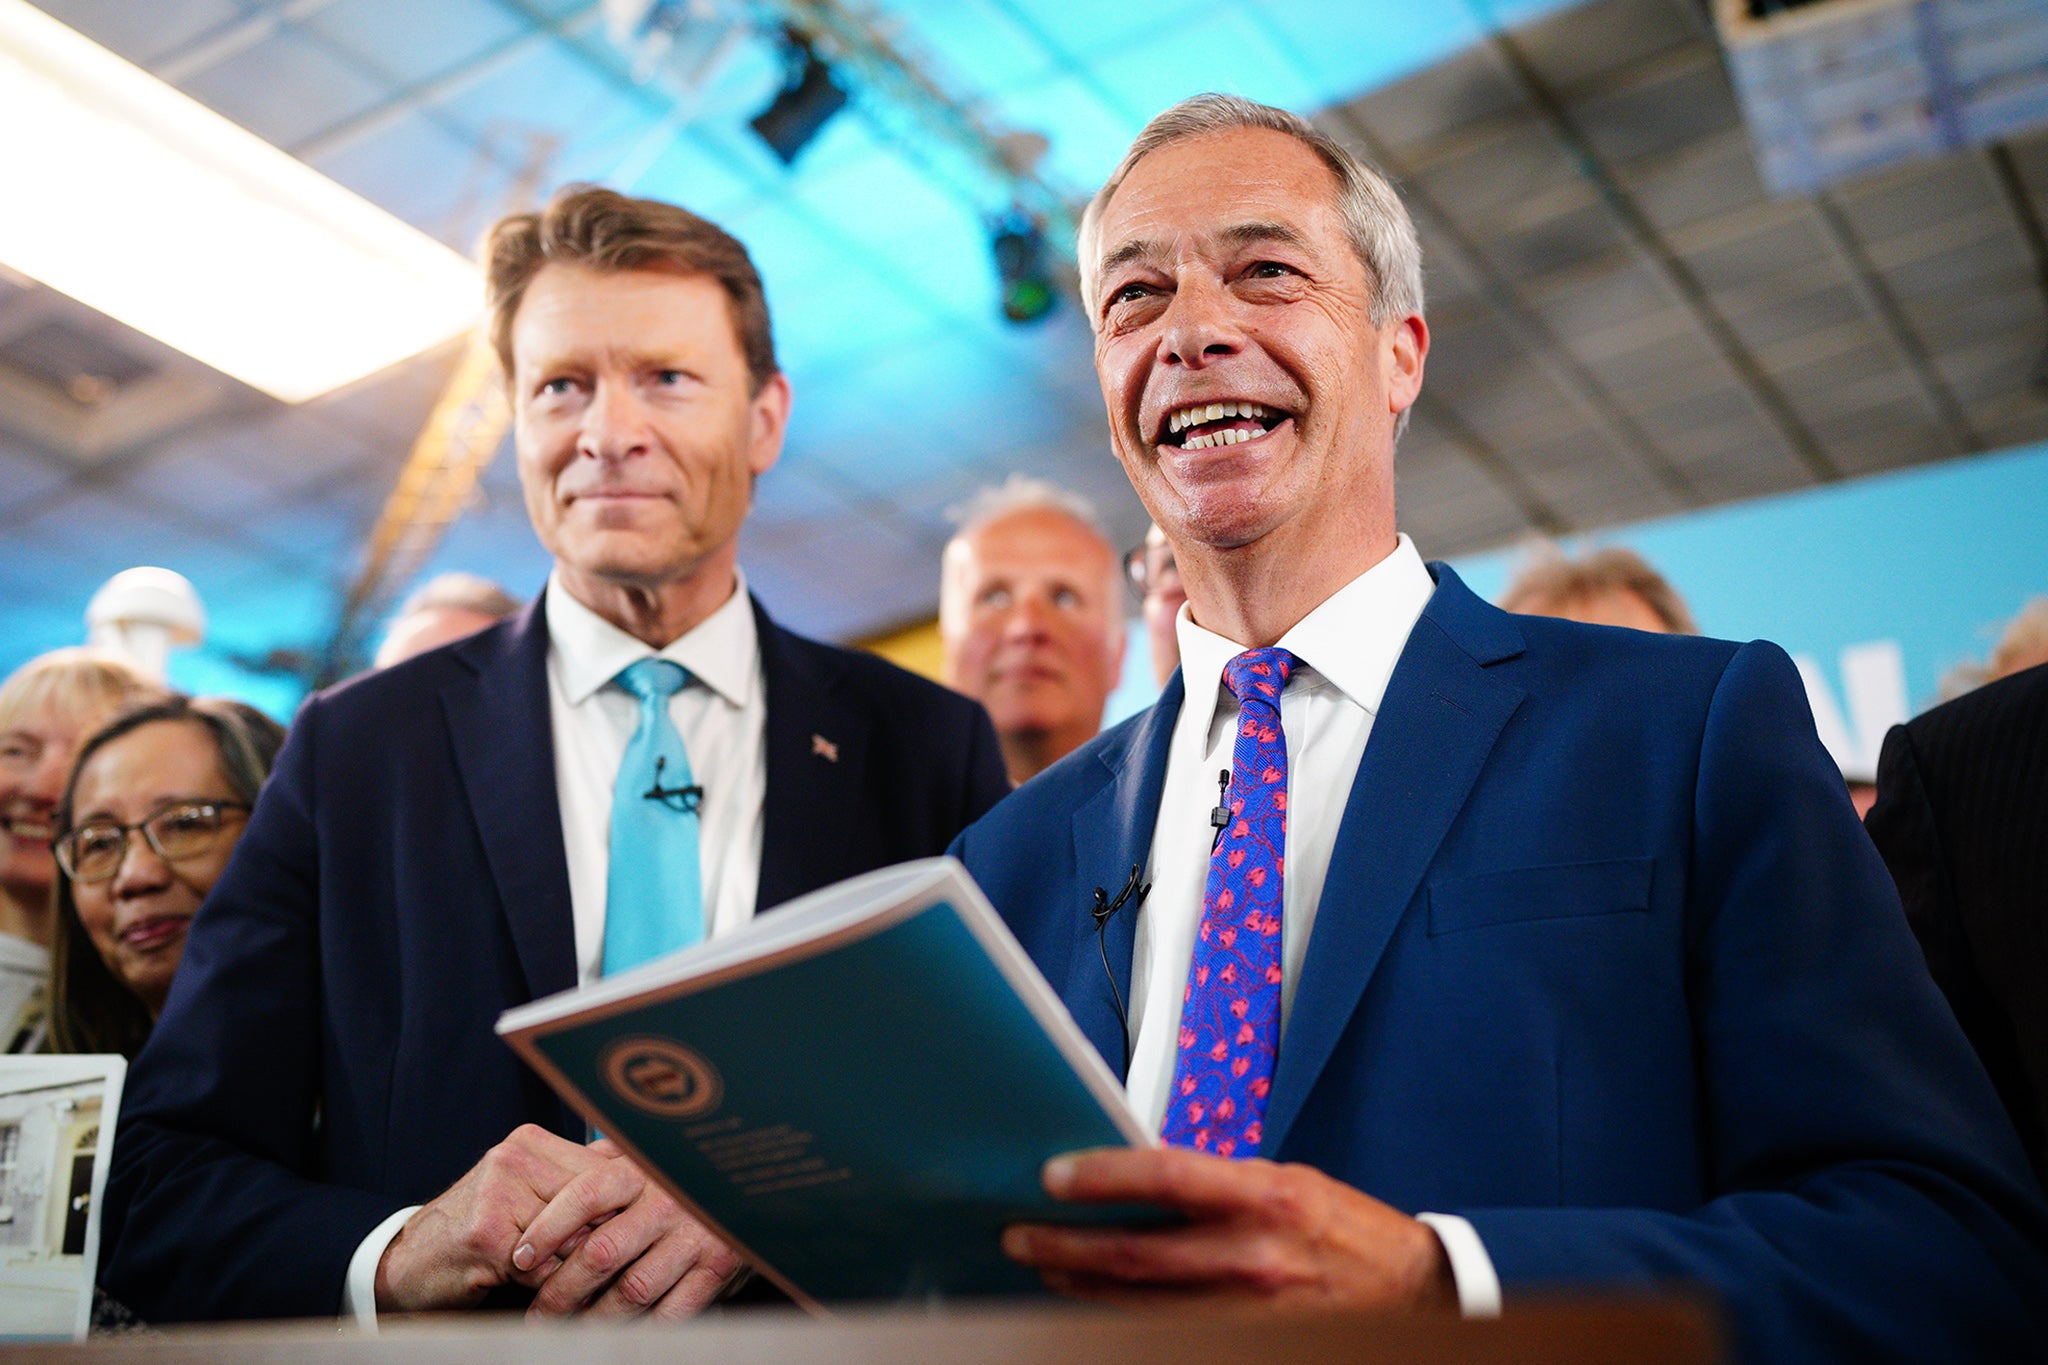 Reform UK chairman Richard Tice (left) and party leader Nigel Farage launch ‘Our Contract with You’ in Merthyr Tydfil on Monday